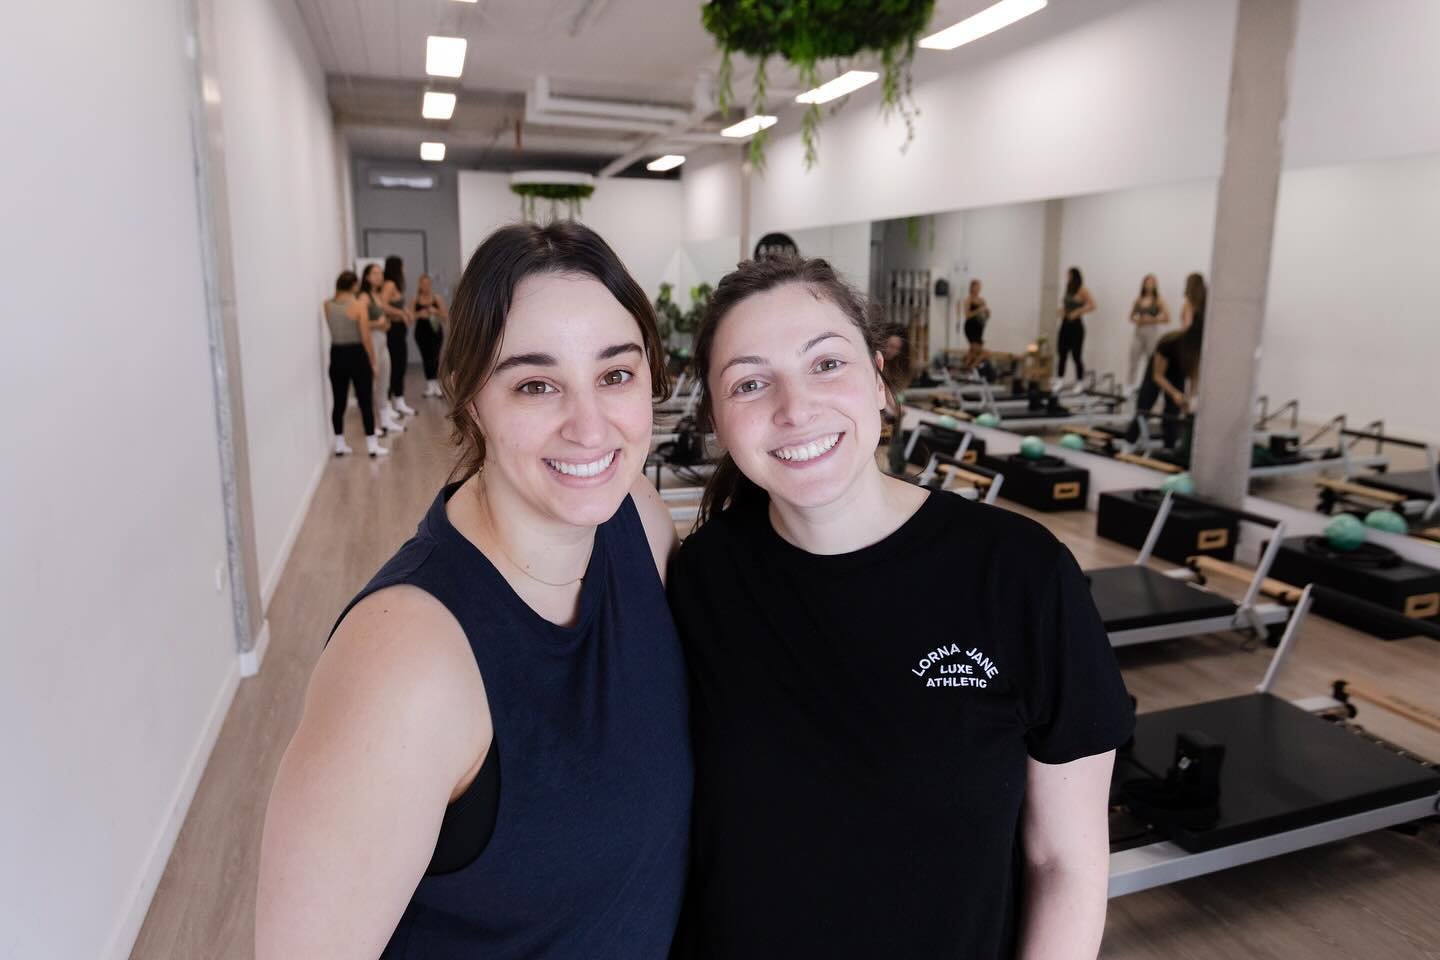 say PILATESSSSSS!!! 😁📸

We want to see your happy snaps in the studios this week to celebrate our 5th birthday 🥳🎉🪩 tag us ➡️ @flex.flow.pilates and hashtag #flexandflowisFIVE for your chance to win a @same_yetdifferent reformer mat! 😍

winner w